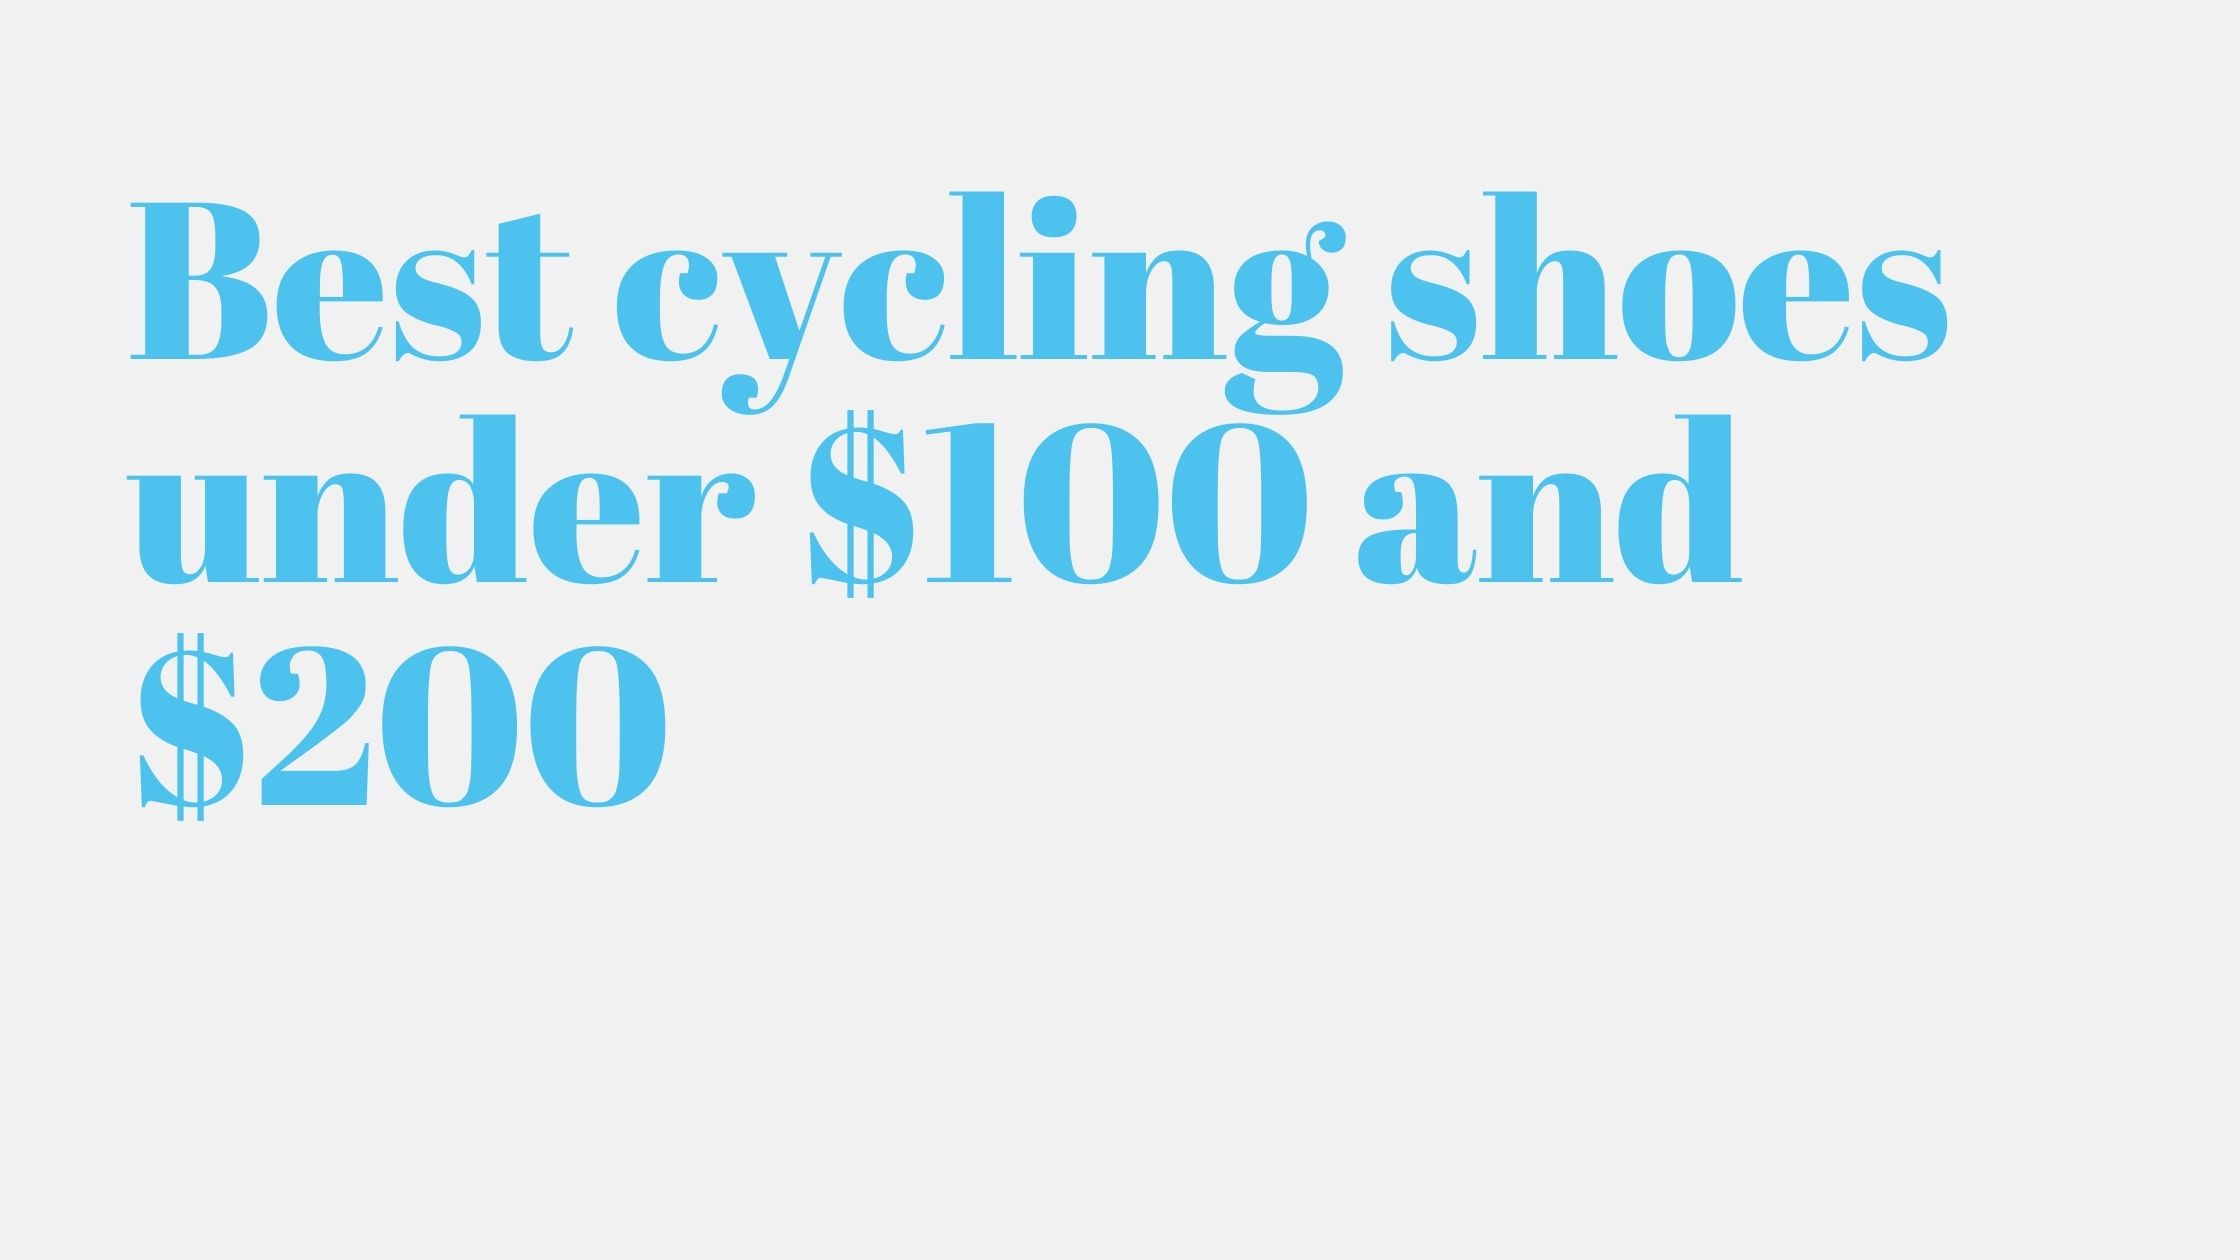 You are currently viewing 10 best cycling shoes under $100 and $200